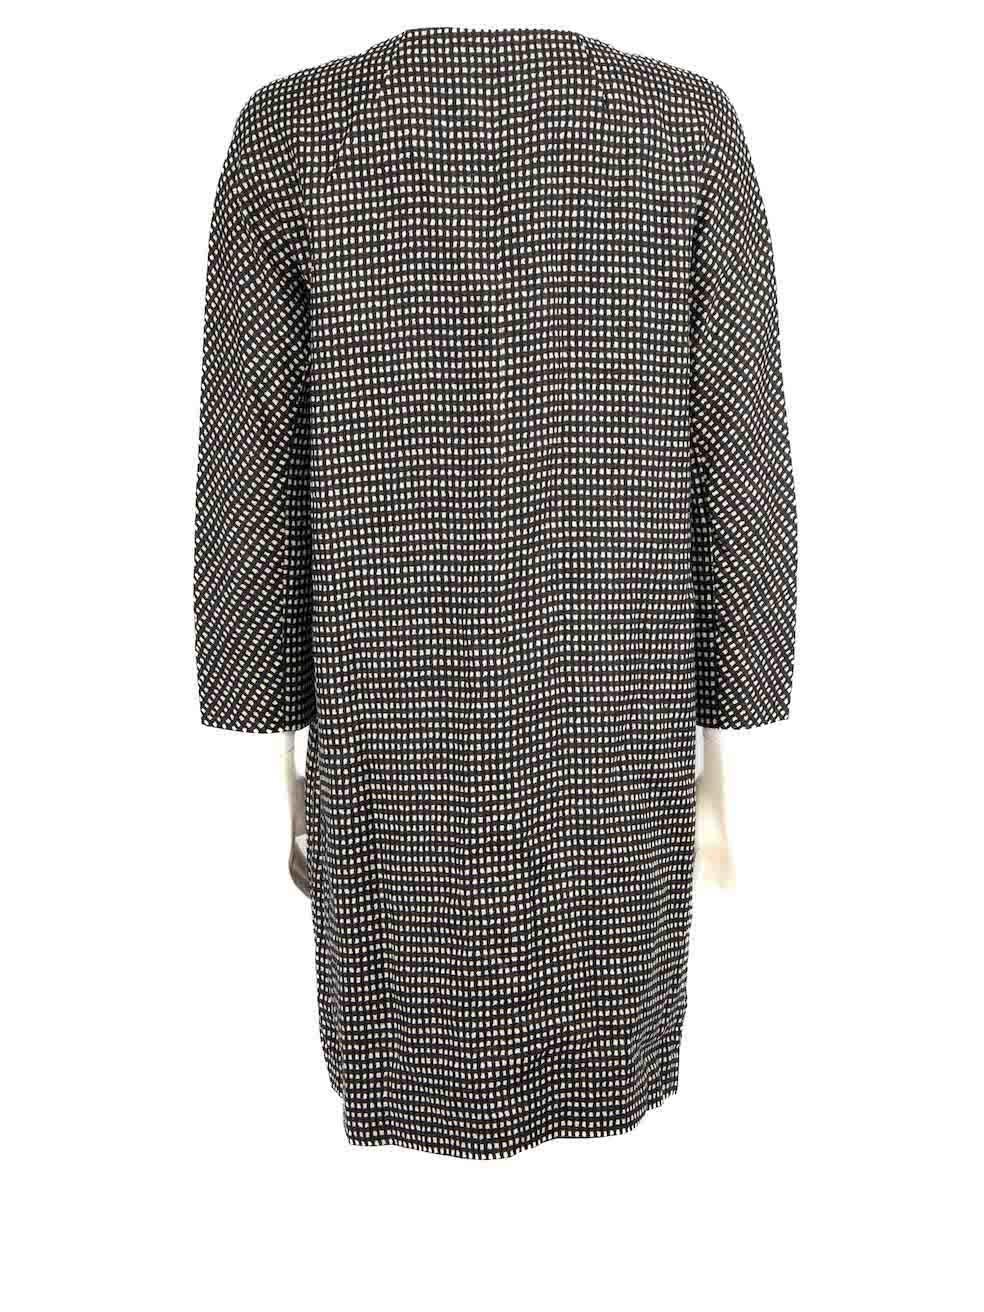 Max Mara Weekend Max Mara Grey Printed Check Mid-Length Coat Size L In New Condition For Sale In London, GB